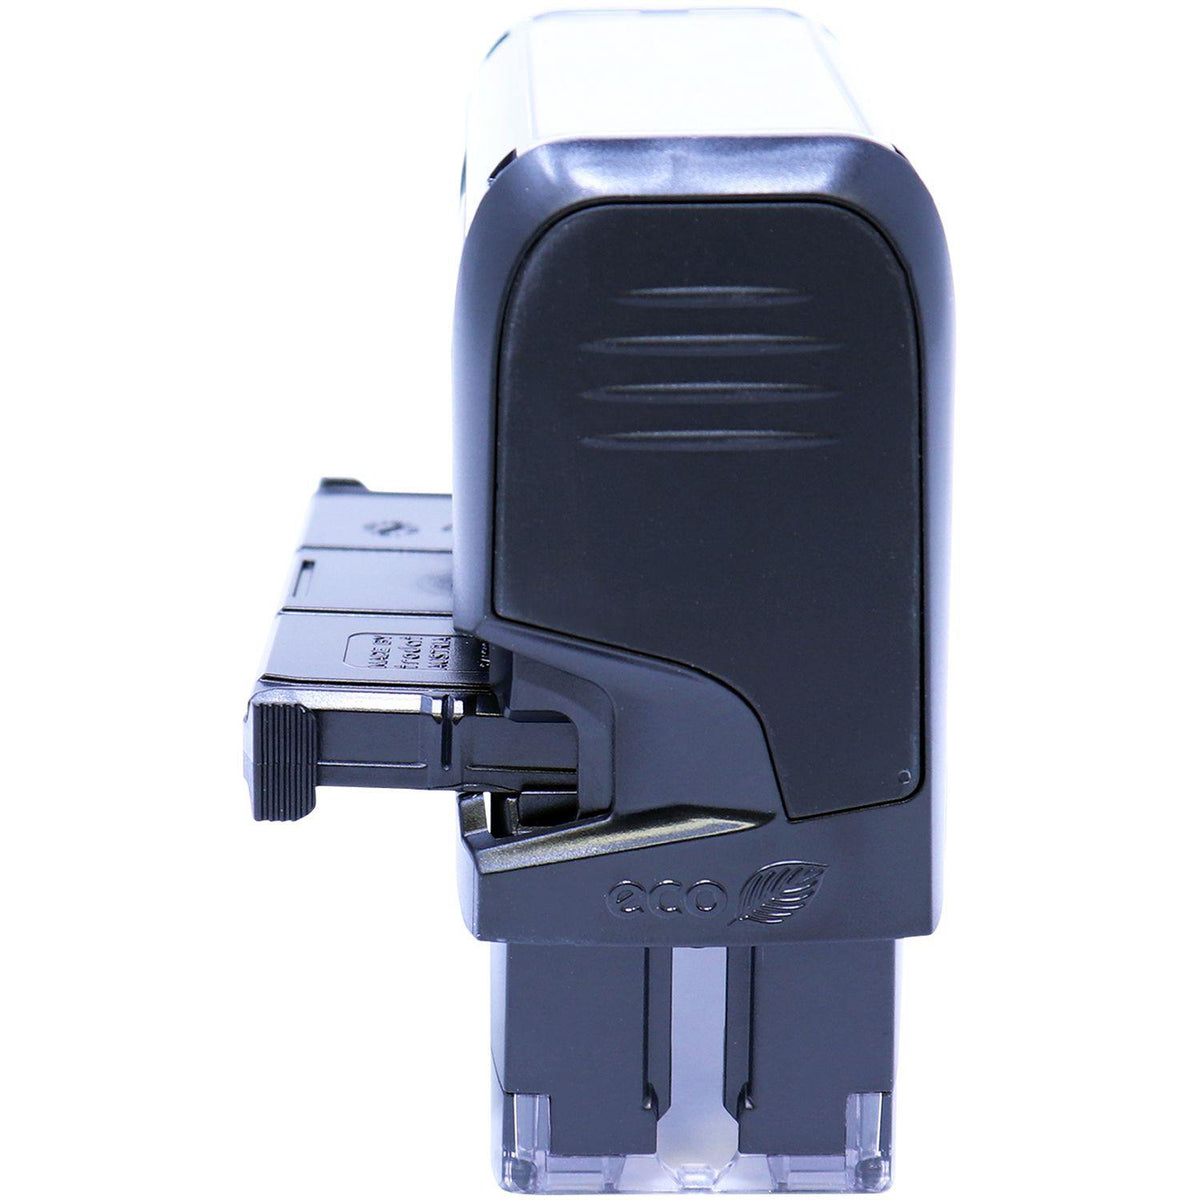 Self Inking First Class Mailing Stamp - Engineer Seal Stamps - Brand_Trodat, Impression Size_Small, Stamp Type_Self-Inking Stamp, Type of Use_Postal &amp; Mailing, Type of Use_Shipping &amp; Receiving